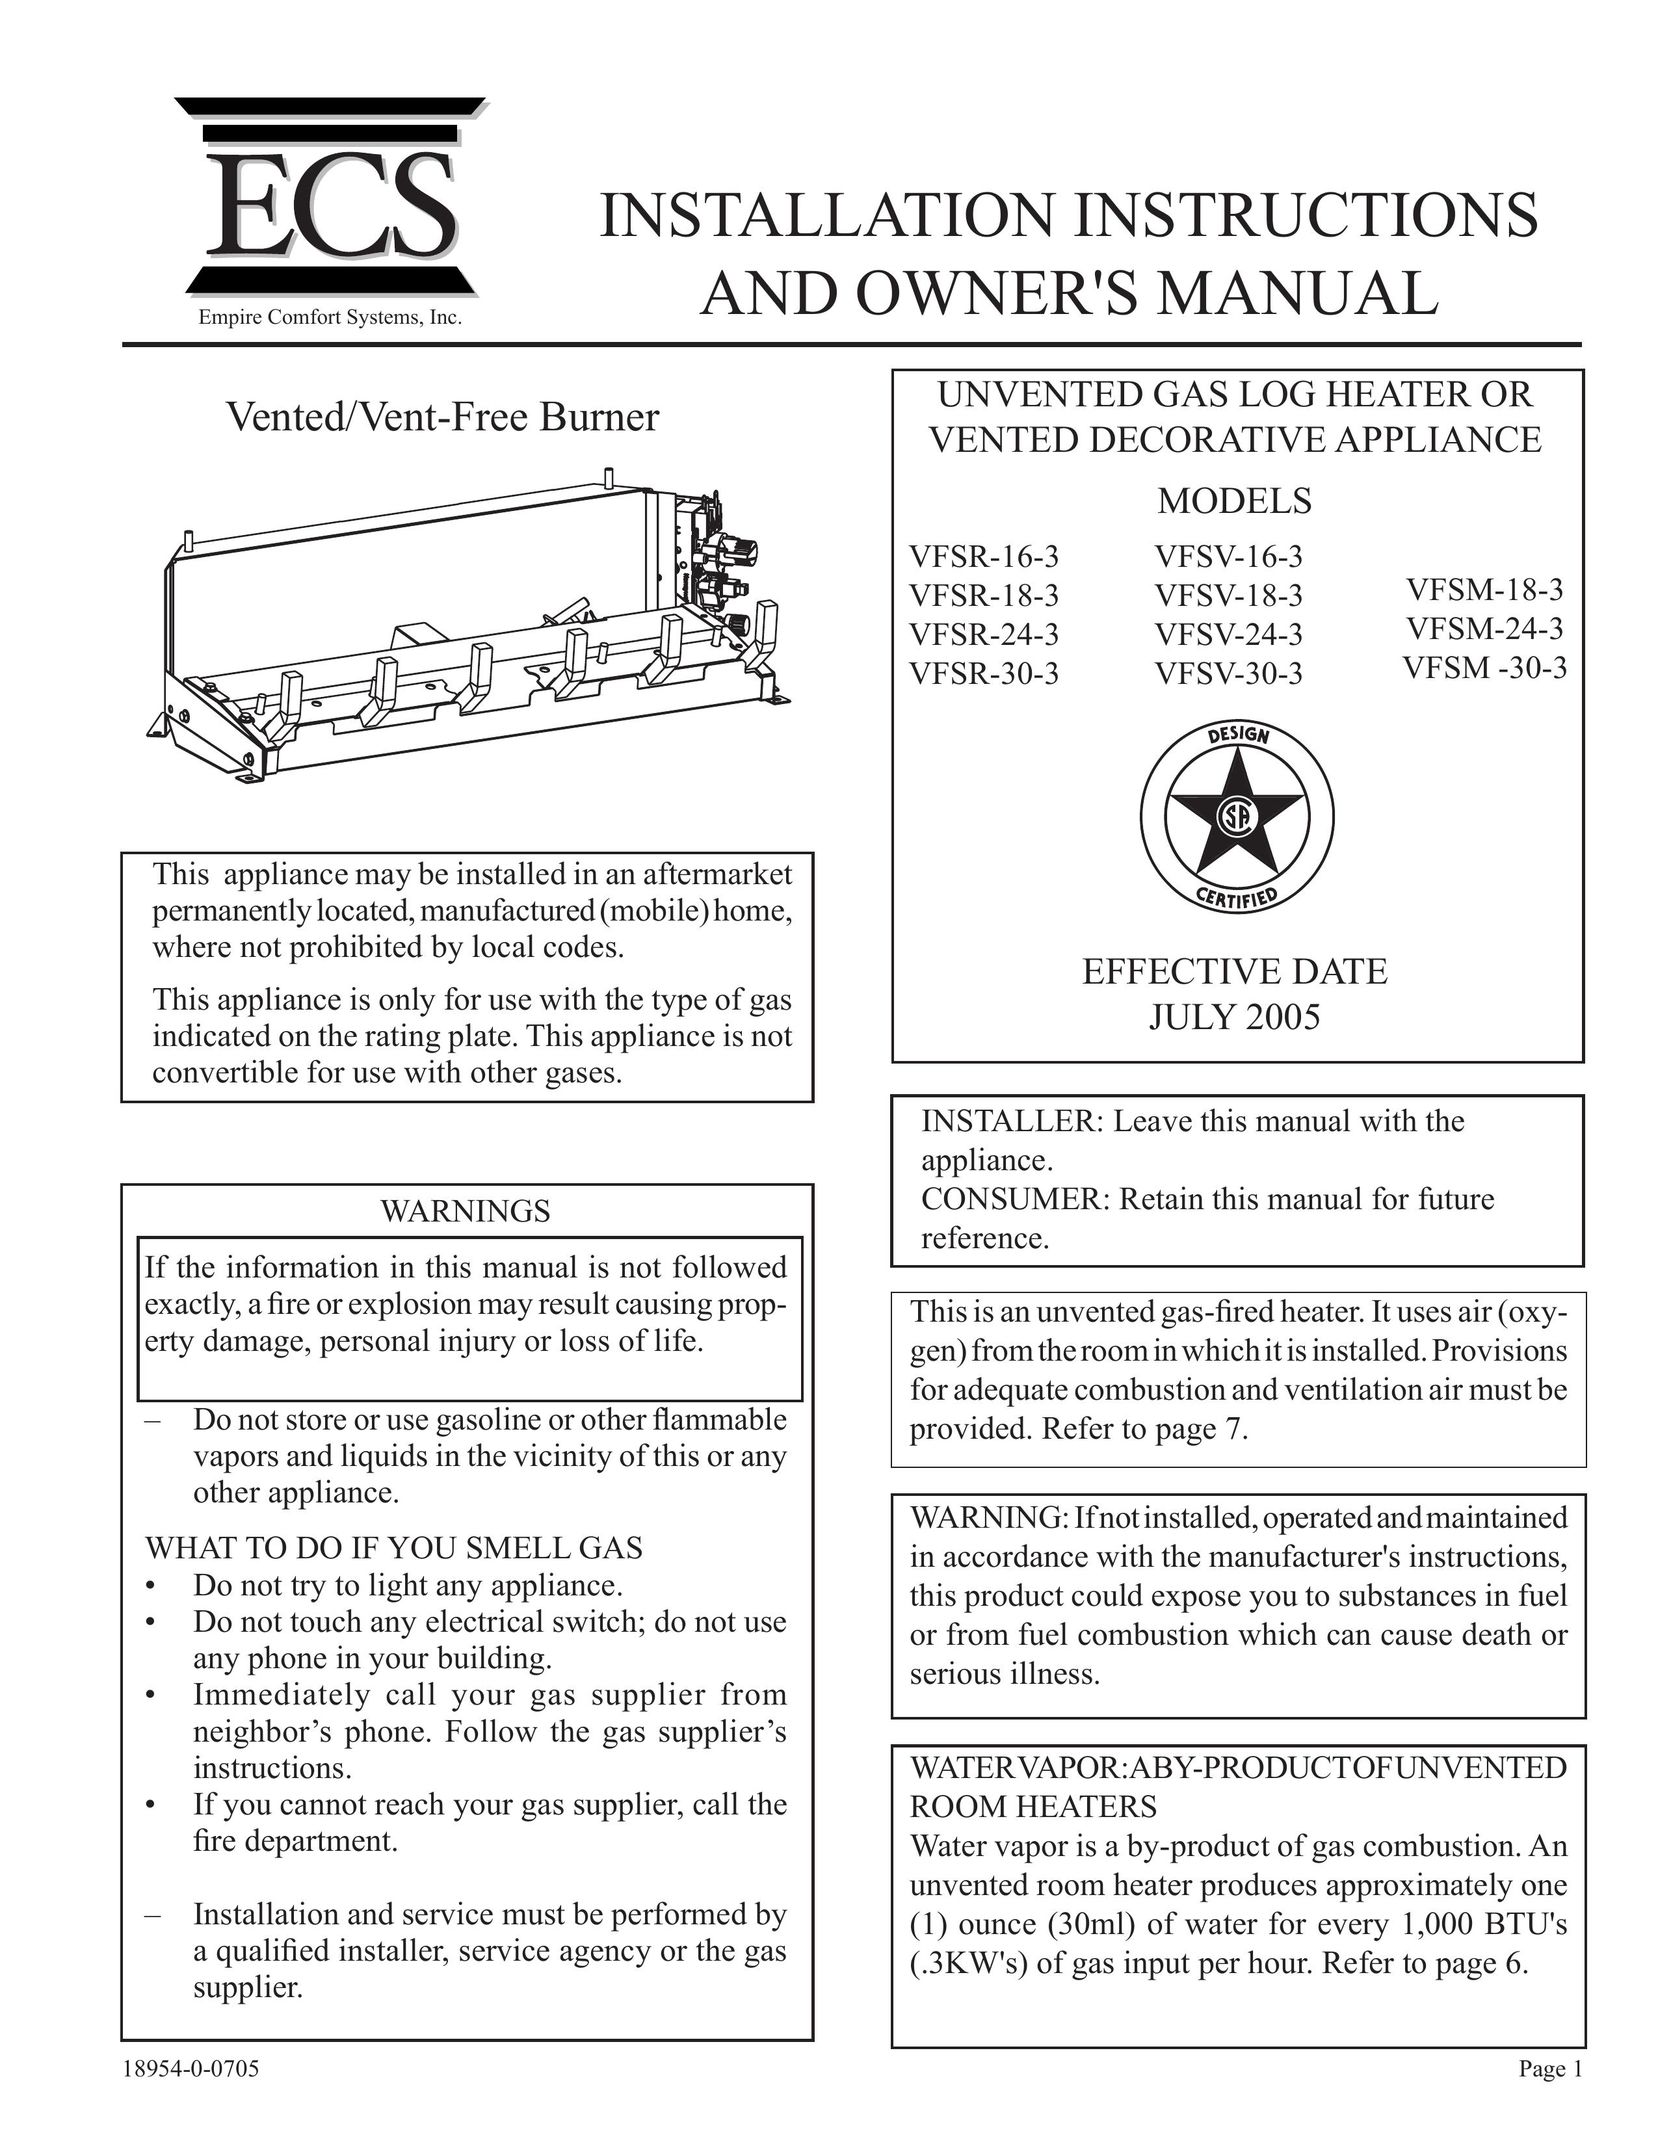 Empire Comfort Systems VFSR-30-3 Electric Heater User Manual